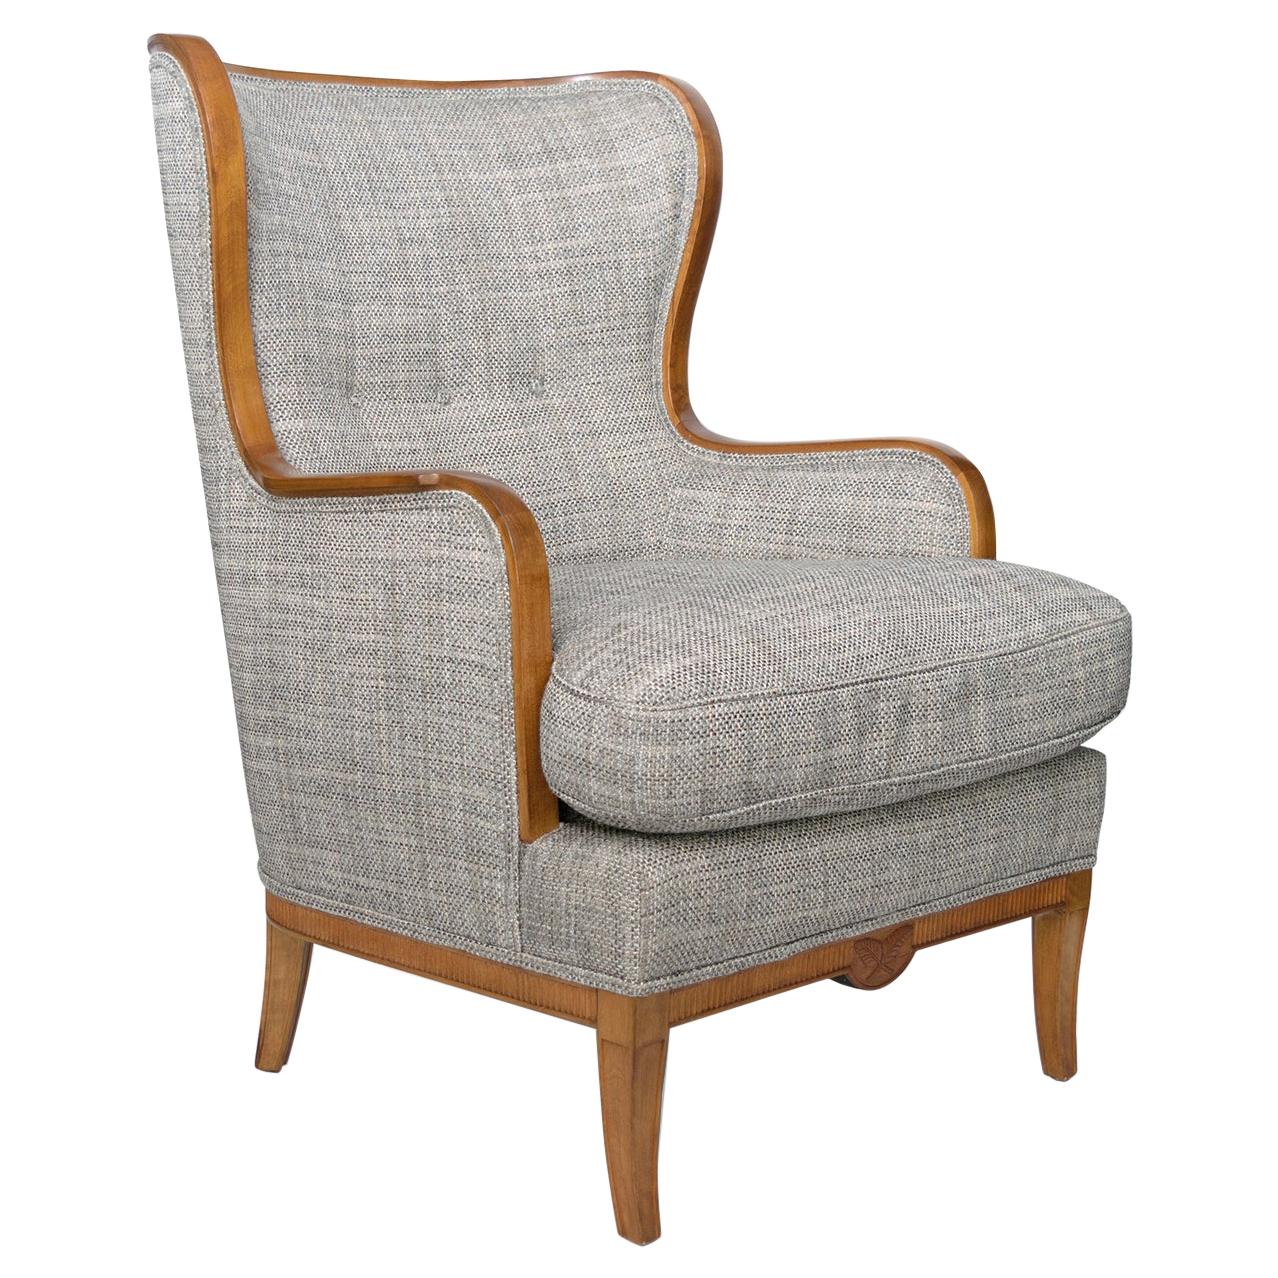 Swedish Grace, Art Deco Large Wingback Chair with Carved Stolid Birch Frame